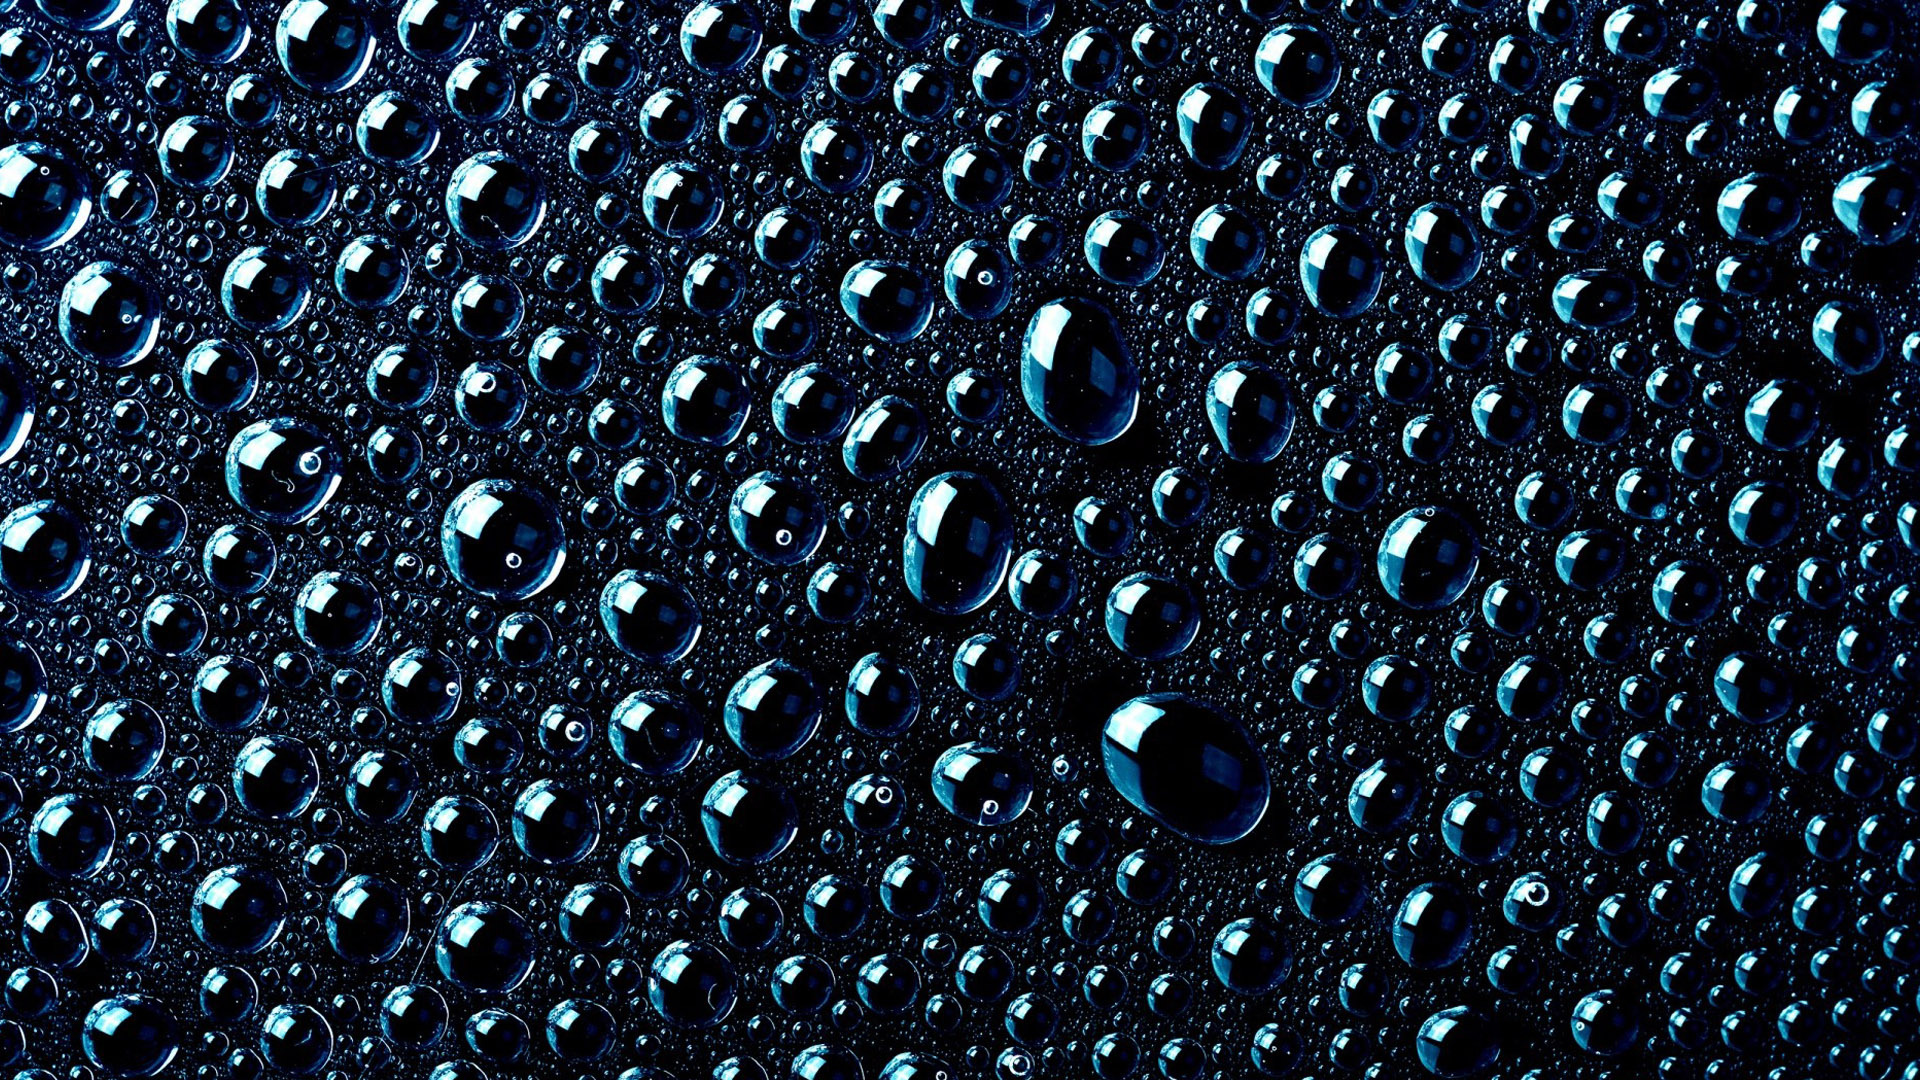 Water drops on a black surface wallpaper   692662